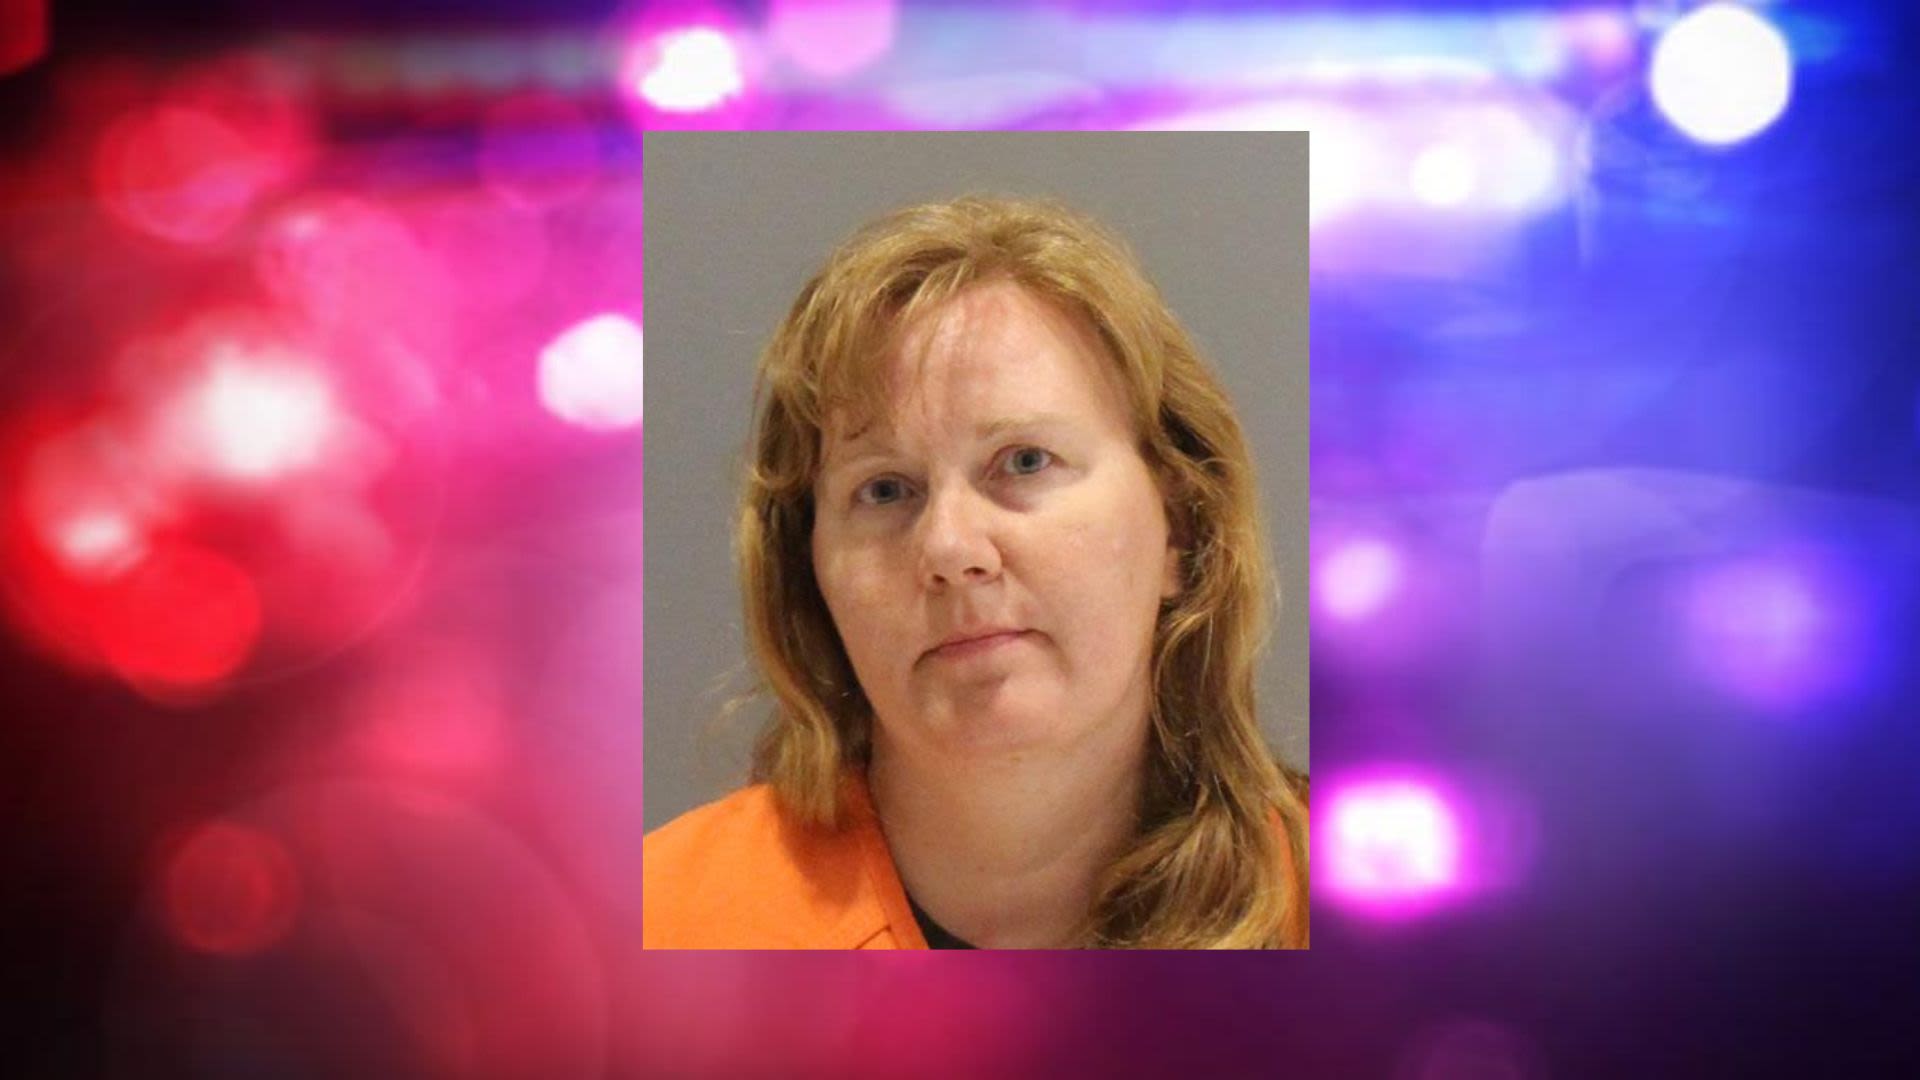 Bond set at $25,000 for Omaha woman accused of trying to castrate dogs